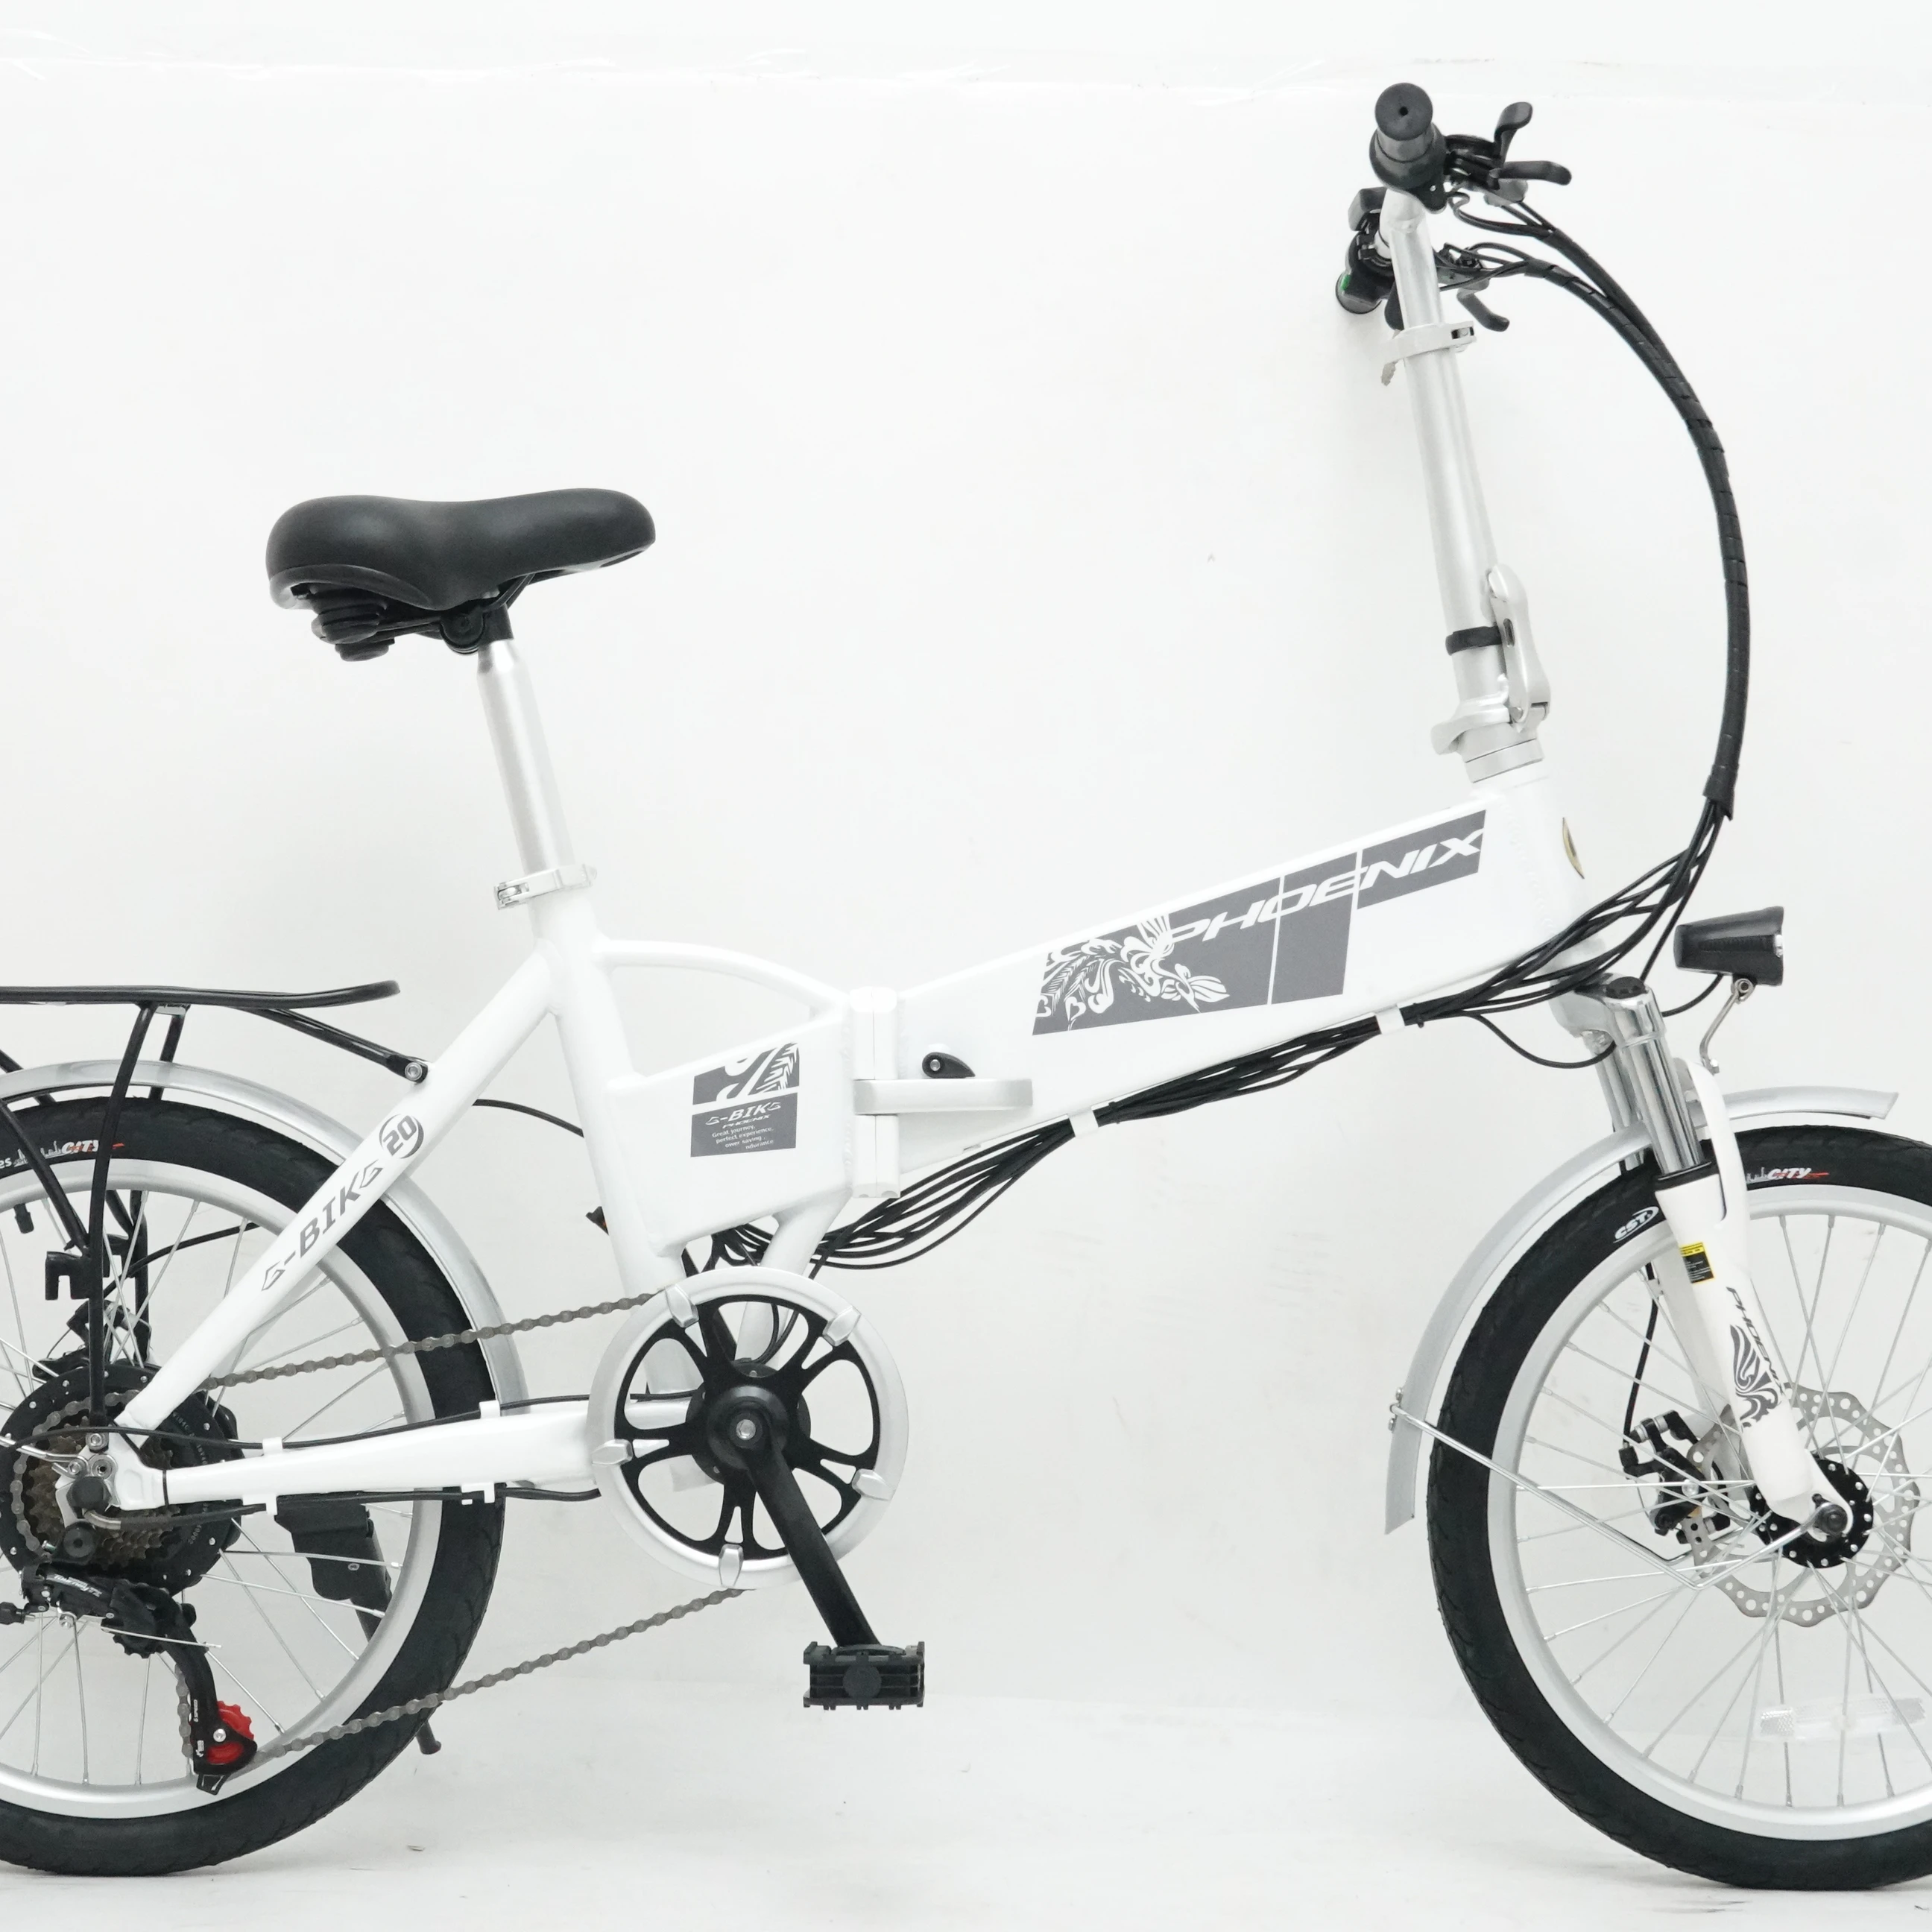 

21 Speed Electric Bike 48V 250W Folding Ebike Lithium Battery Electric Bicycle from China Max Motor Frame Power Wheel Material